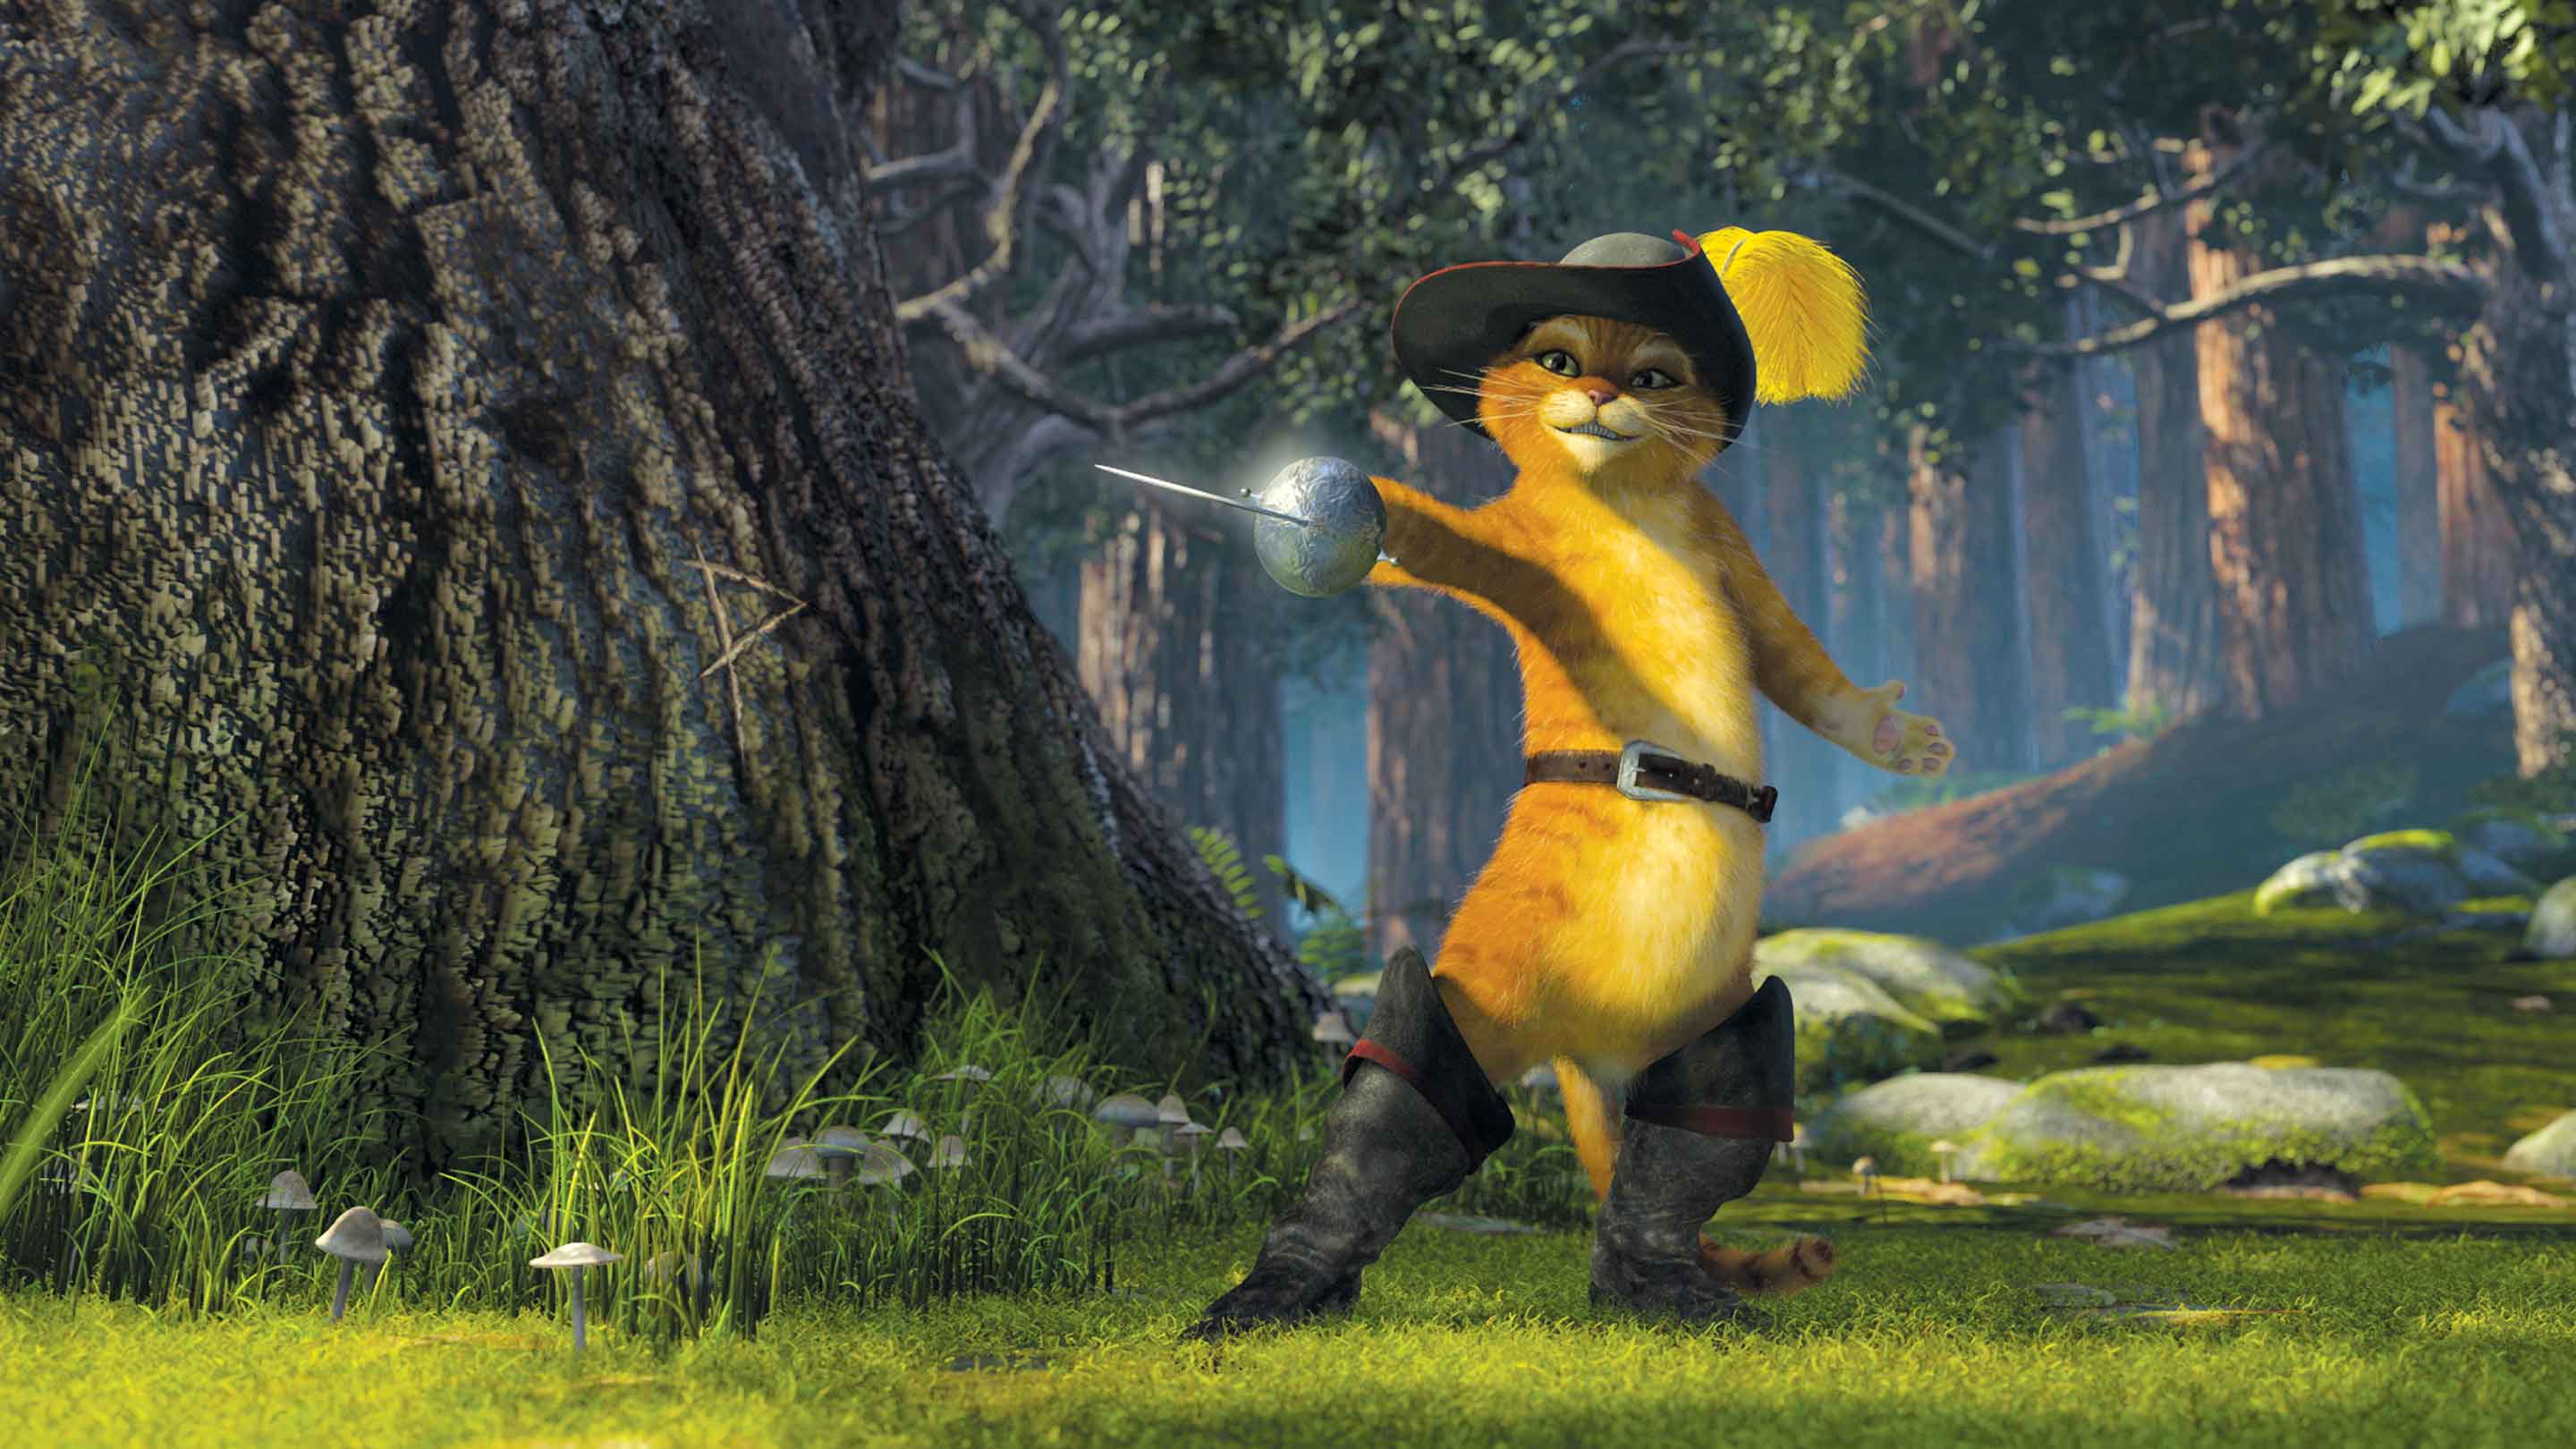 Puss in Boots wields his sword, standing in a forest.